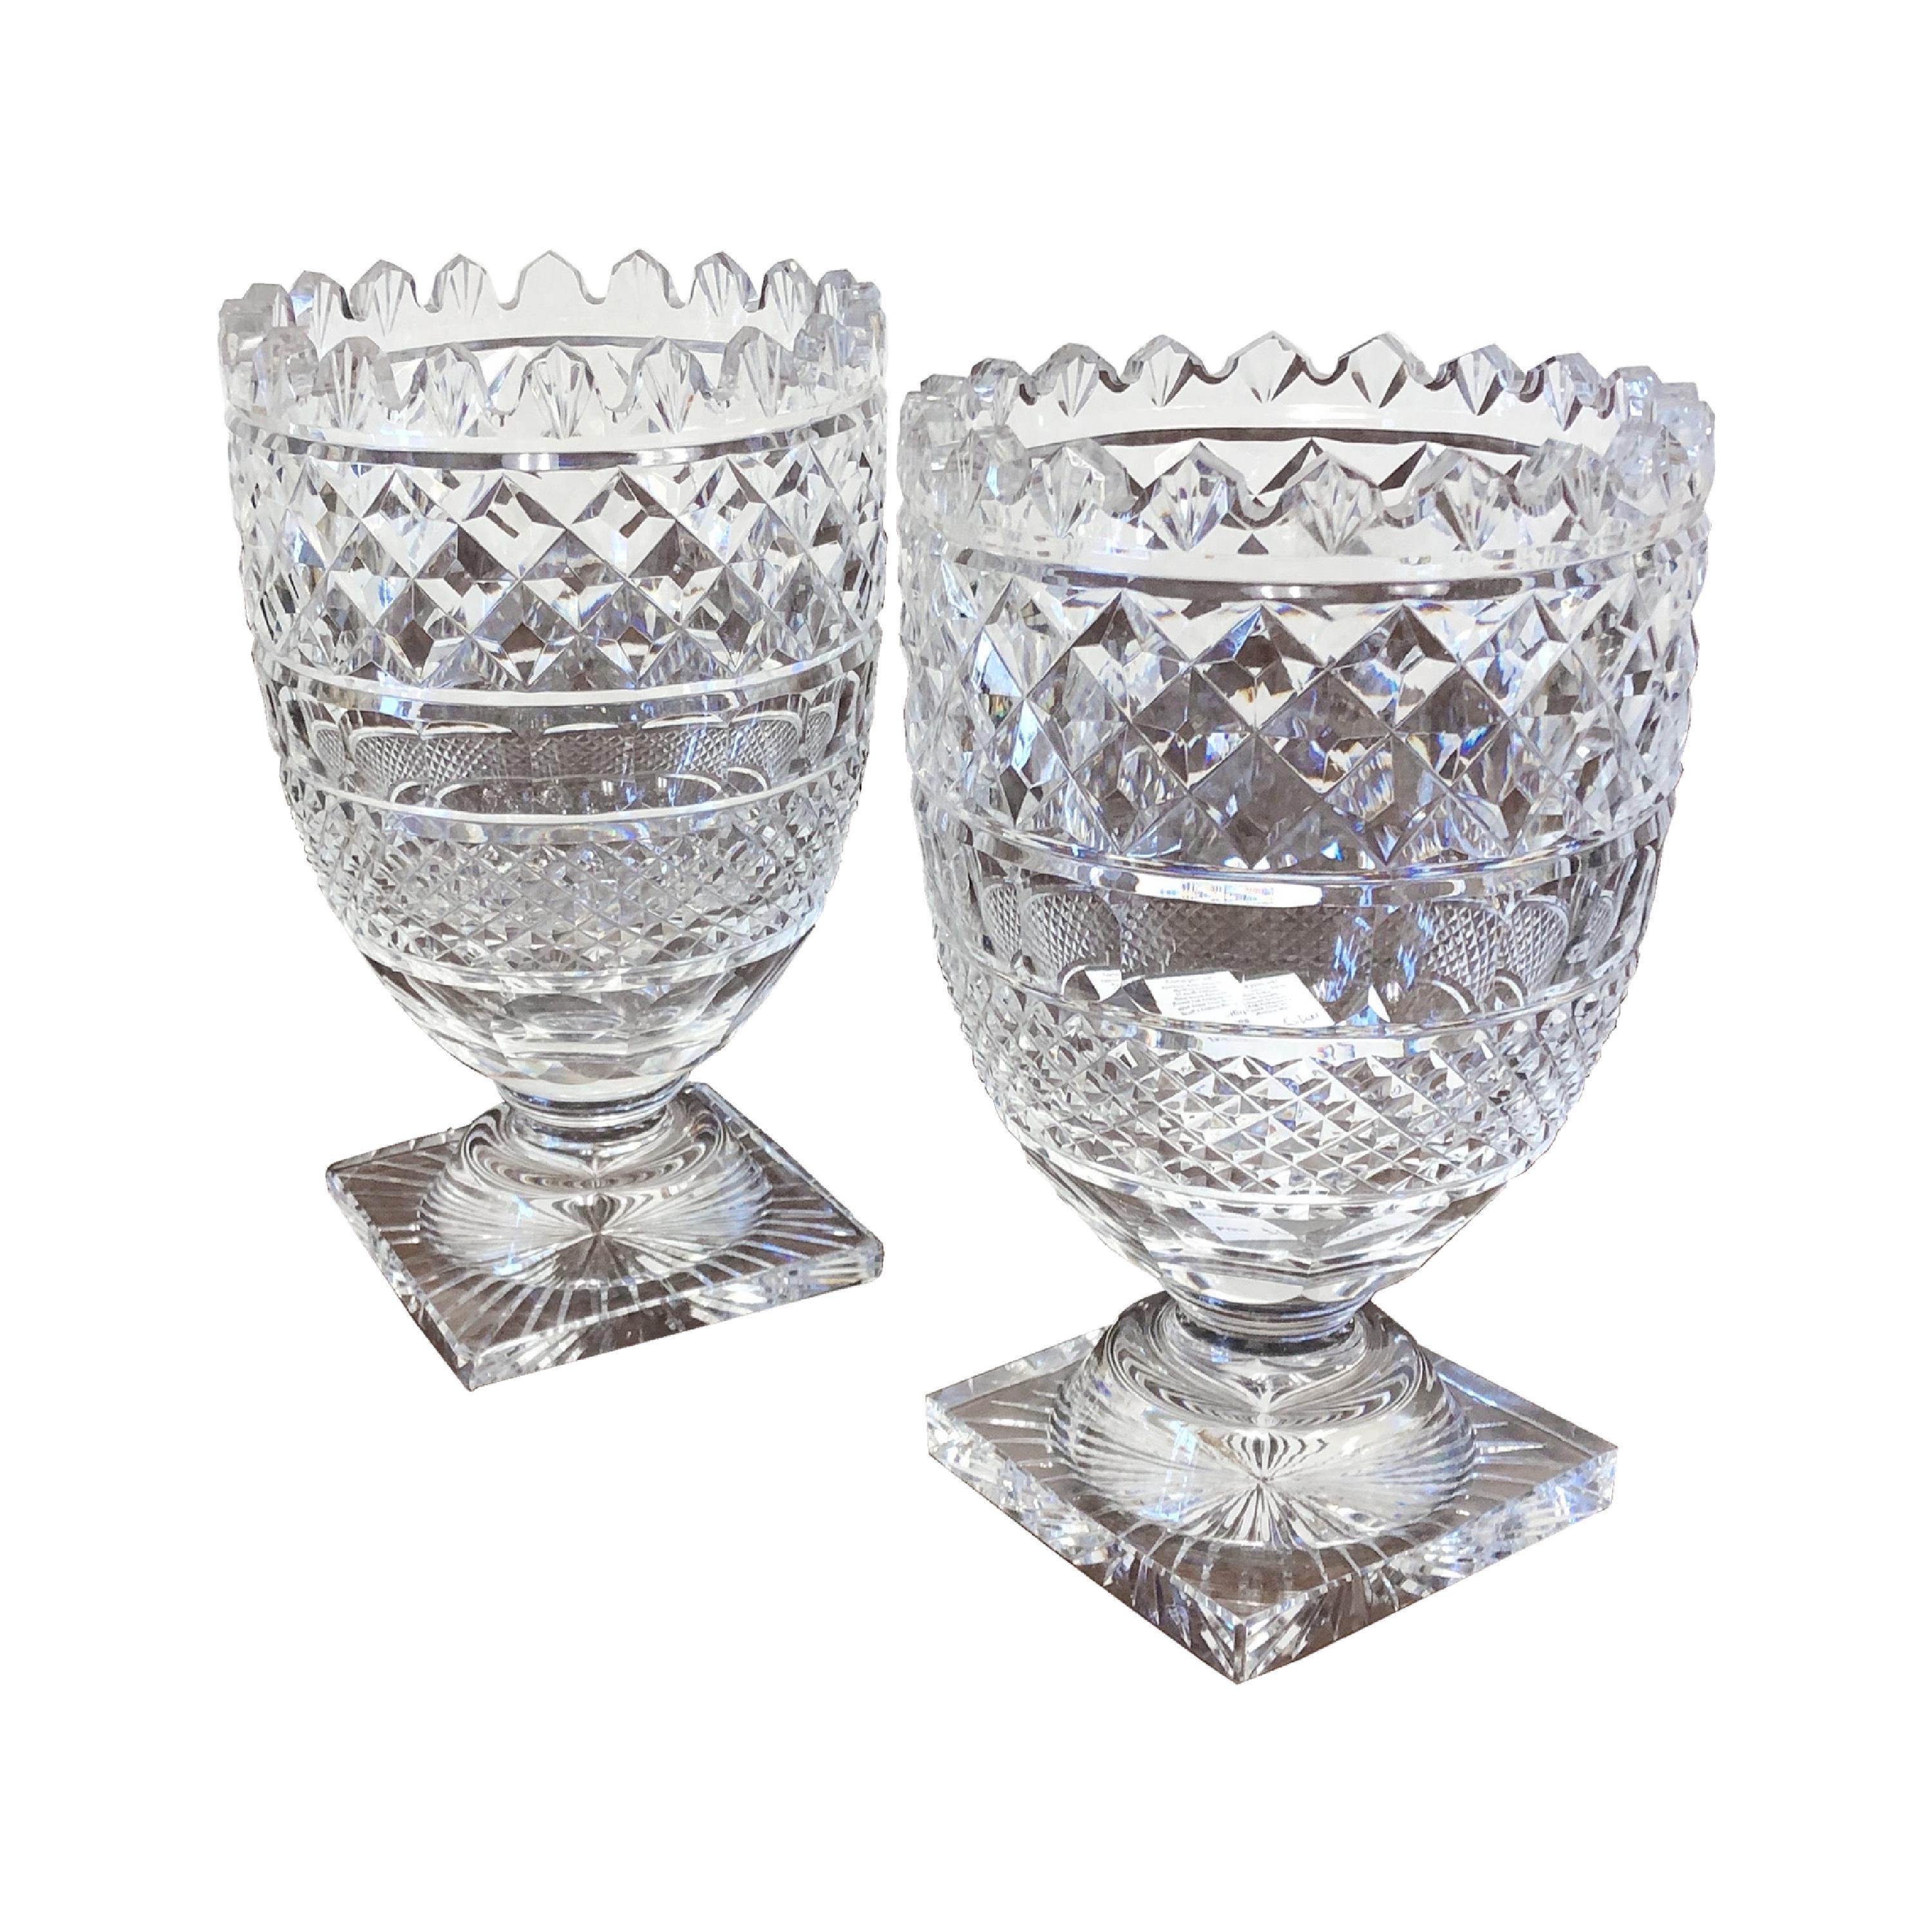 Pair of Late 19th-Early 20th Century Cut Glass Vases